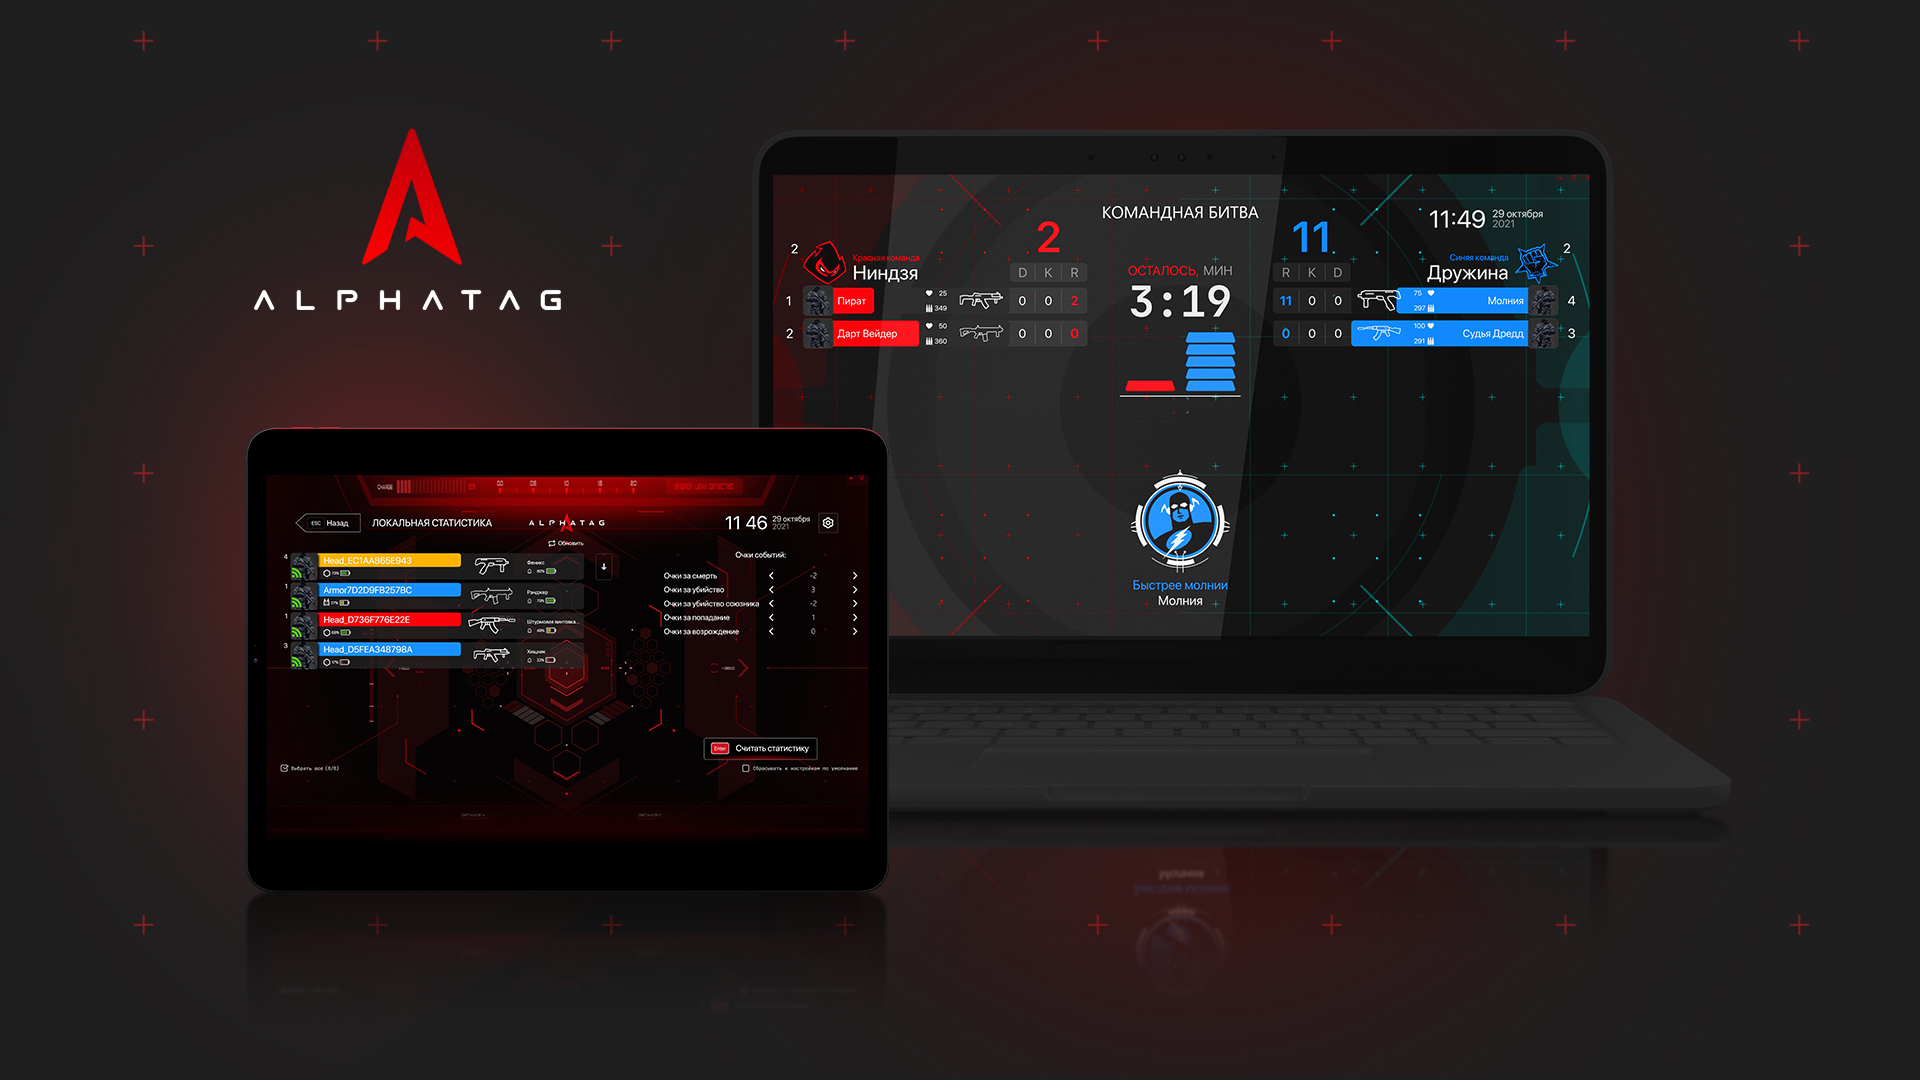 Alphatag offline stats! Download firmware and software updates